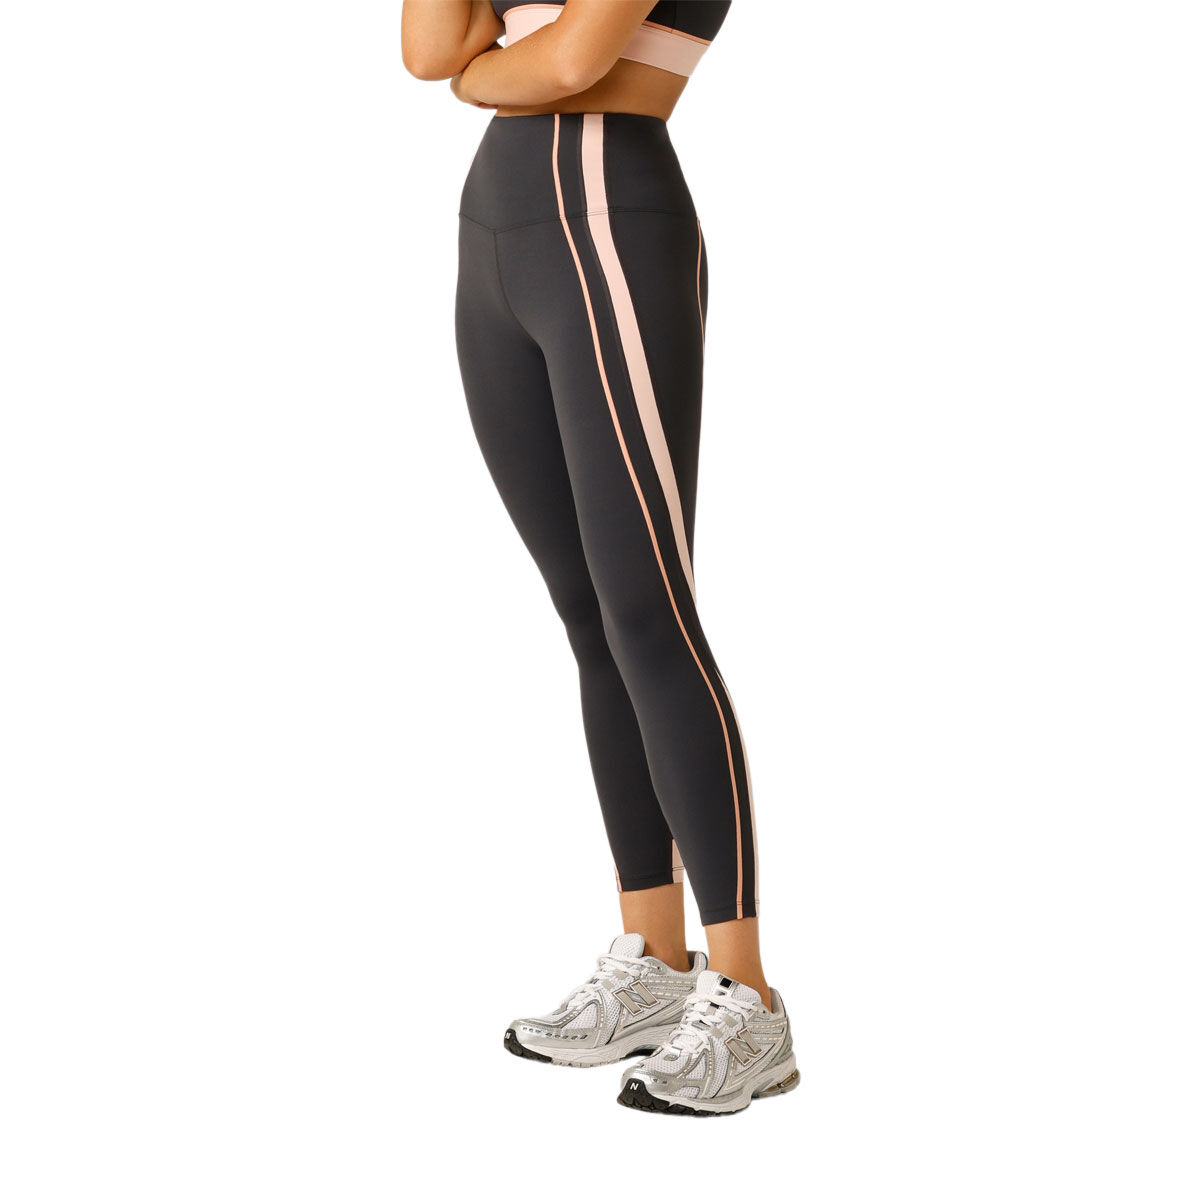 High Waisted Leggings for Women Pack-Black Active High Waisted Soft Tummy  Control Workout Running Yoga Pants C-1 Pack Small-Medium 6-1 Pack Brown